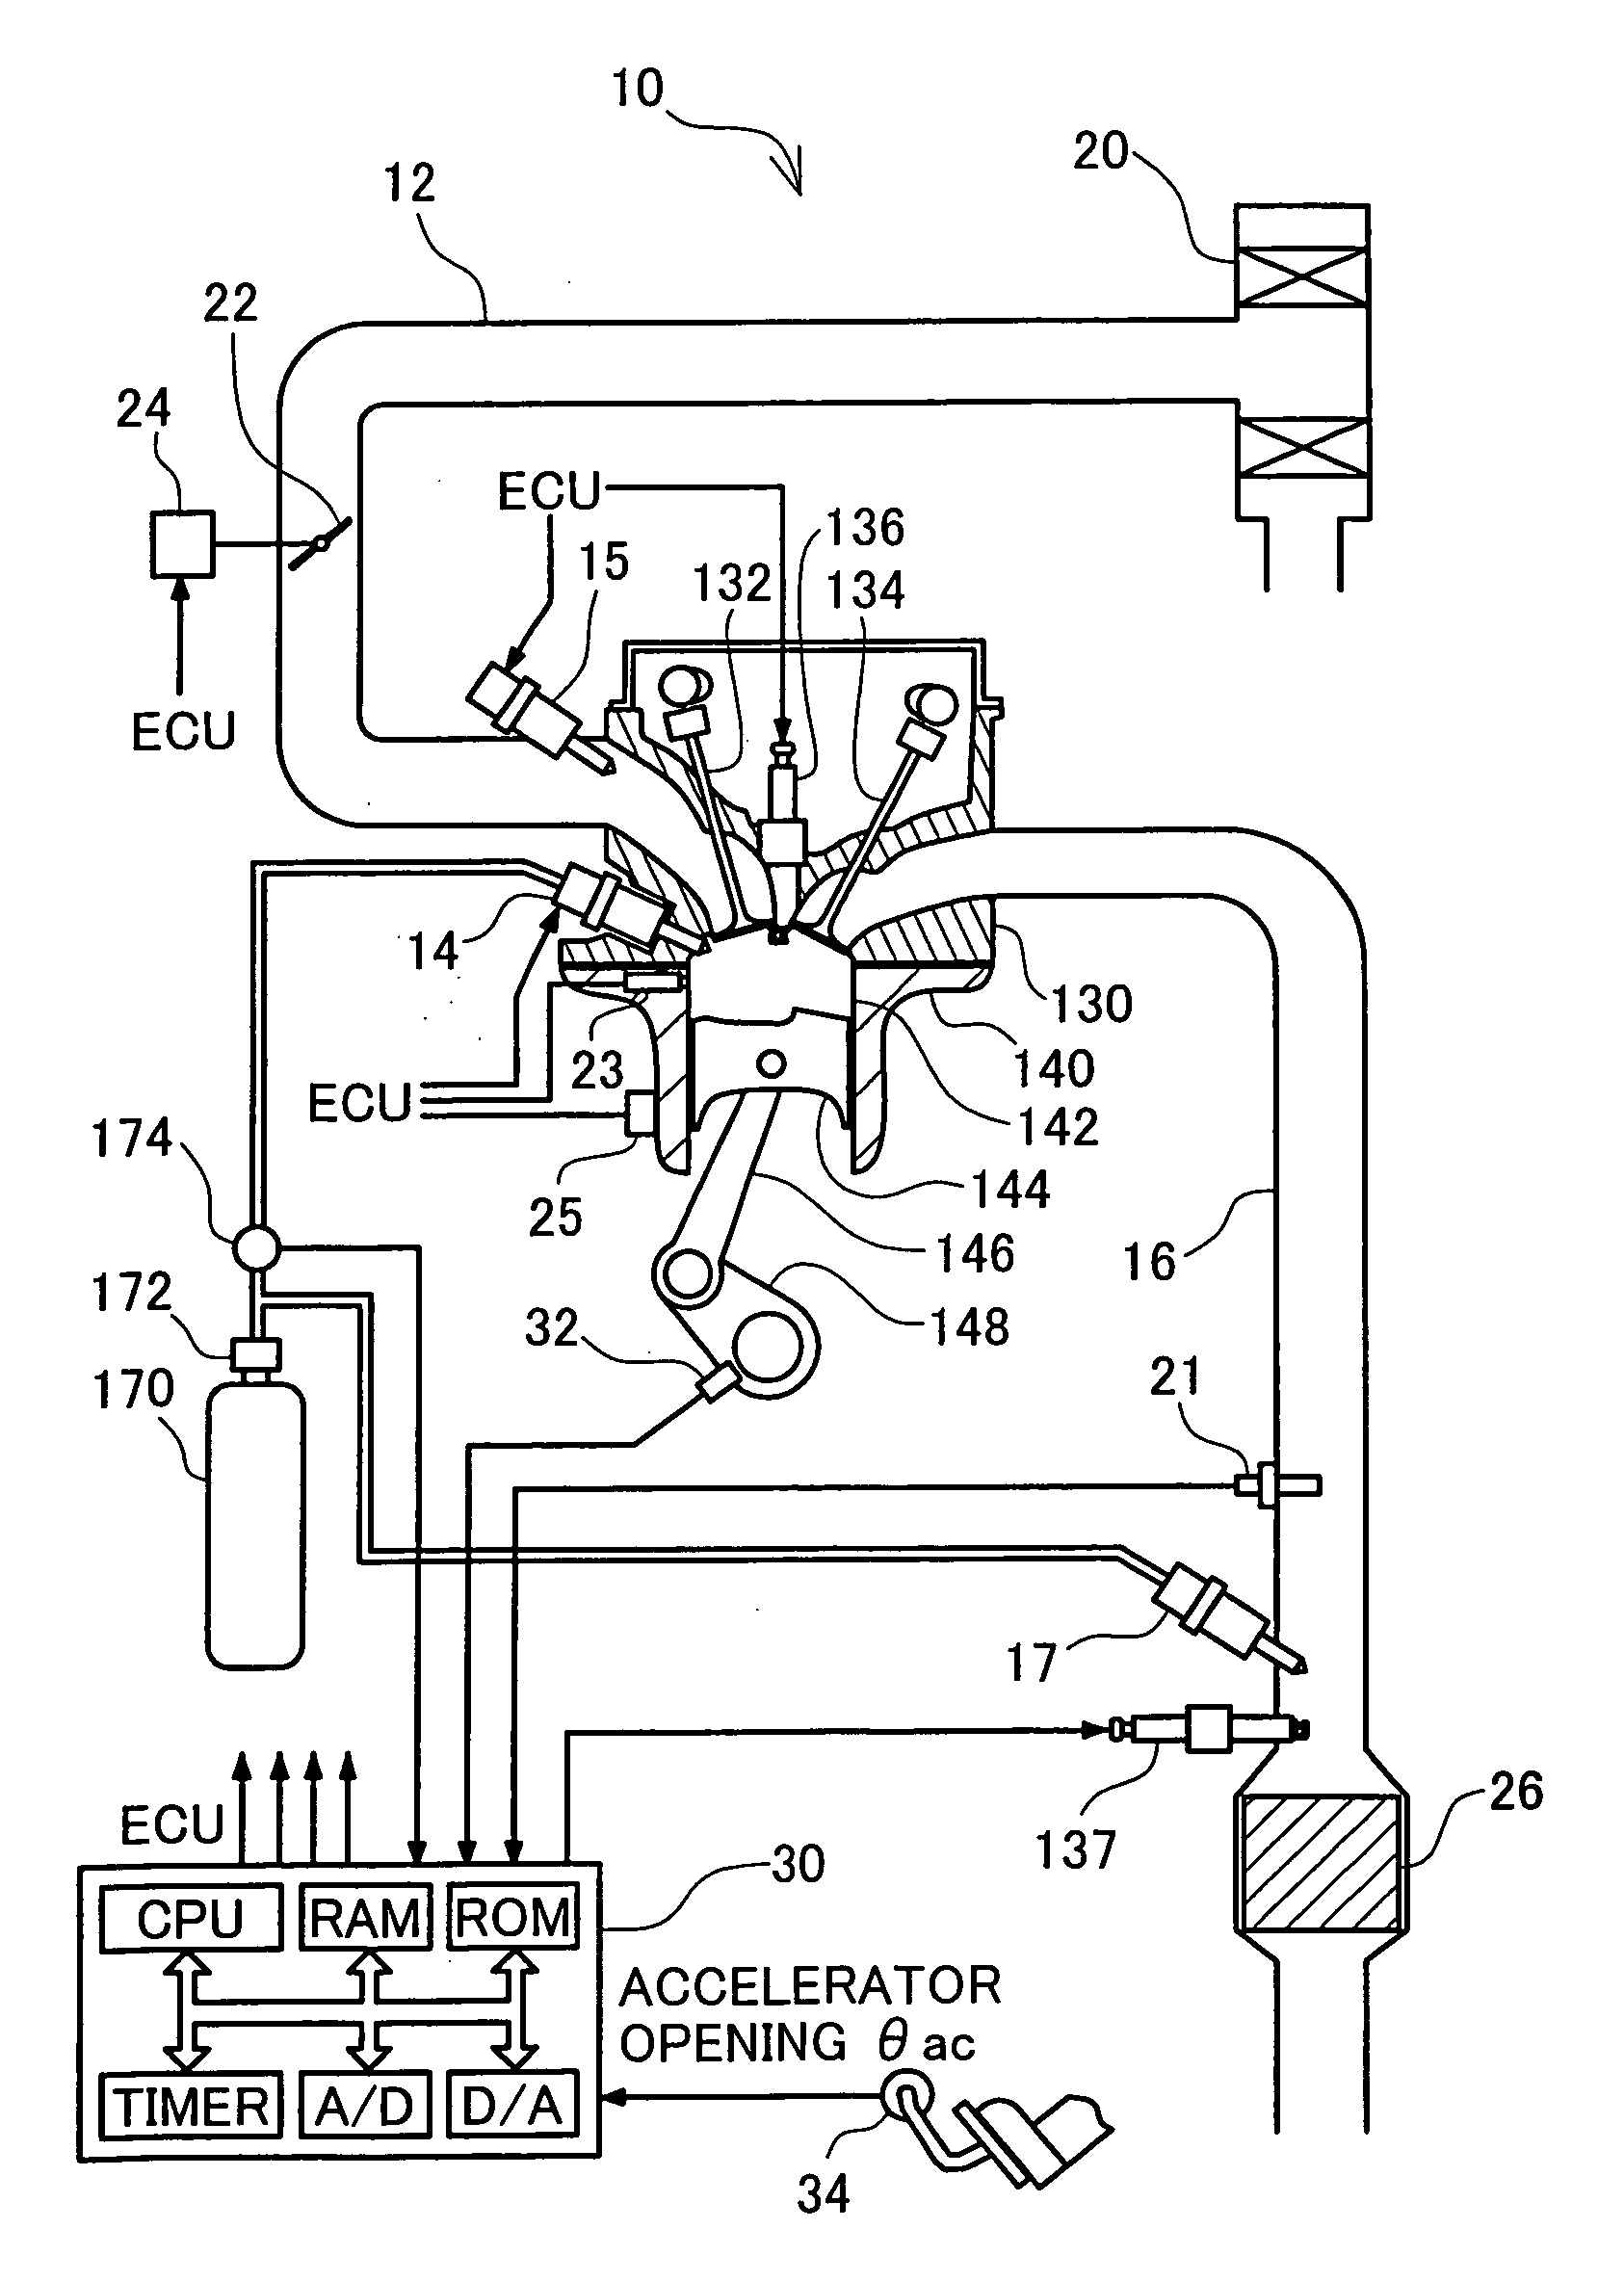 Internal combustion engine of compressing and auto-igniting air-fuel mixture and method of controlling such internal combustion engine